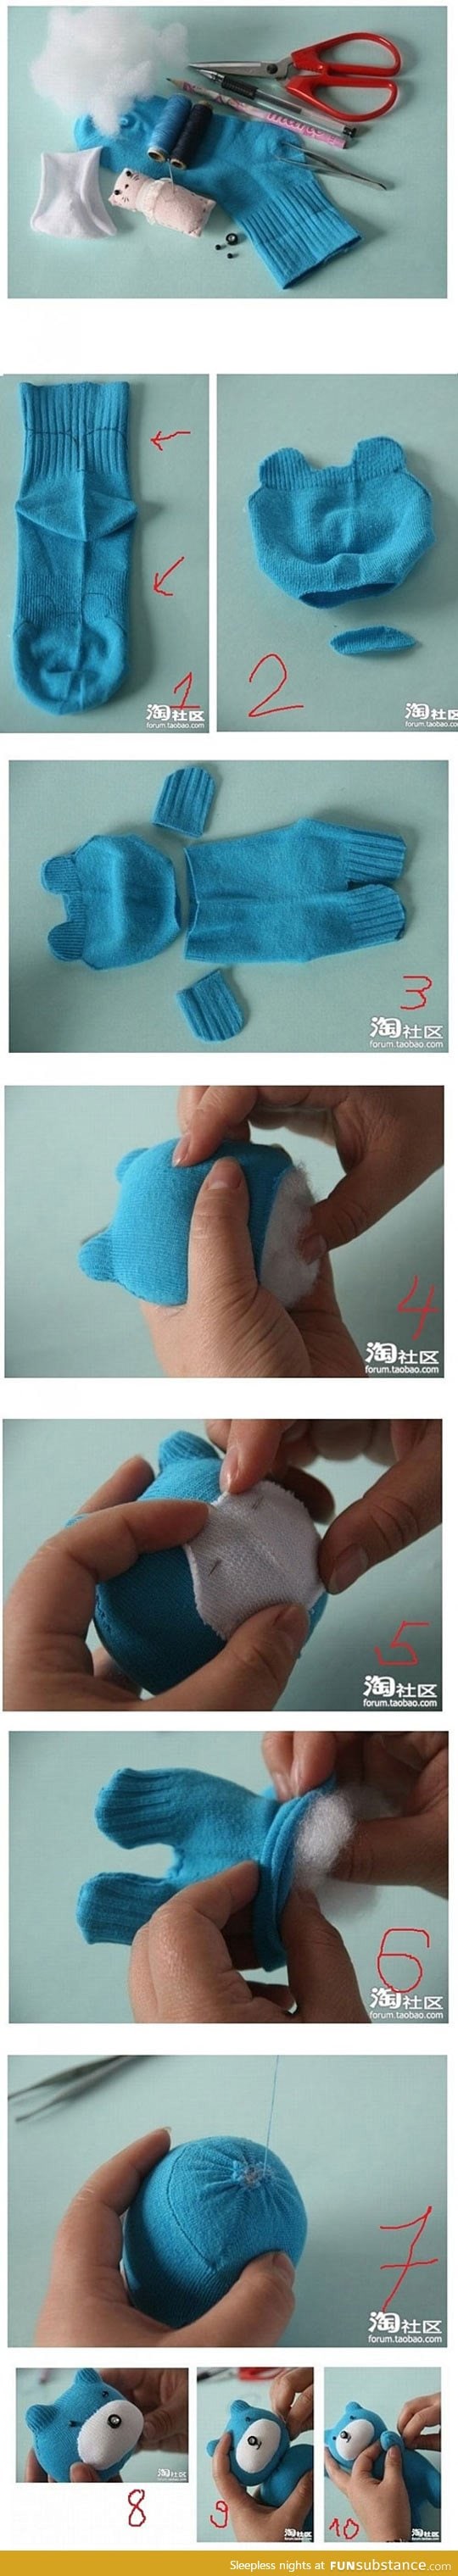 How to make a teddy bear from a sock